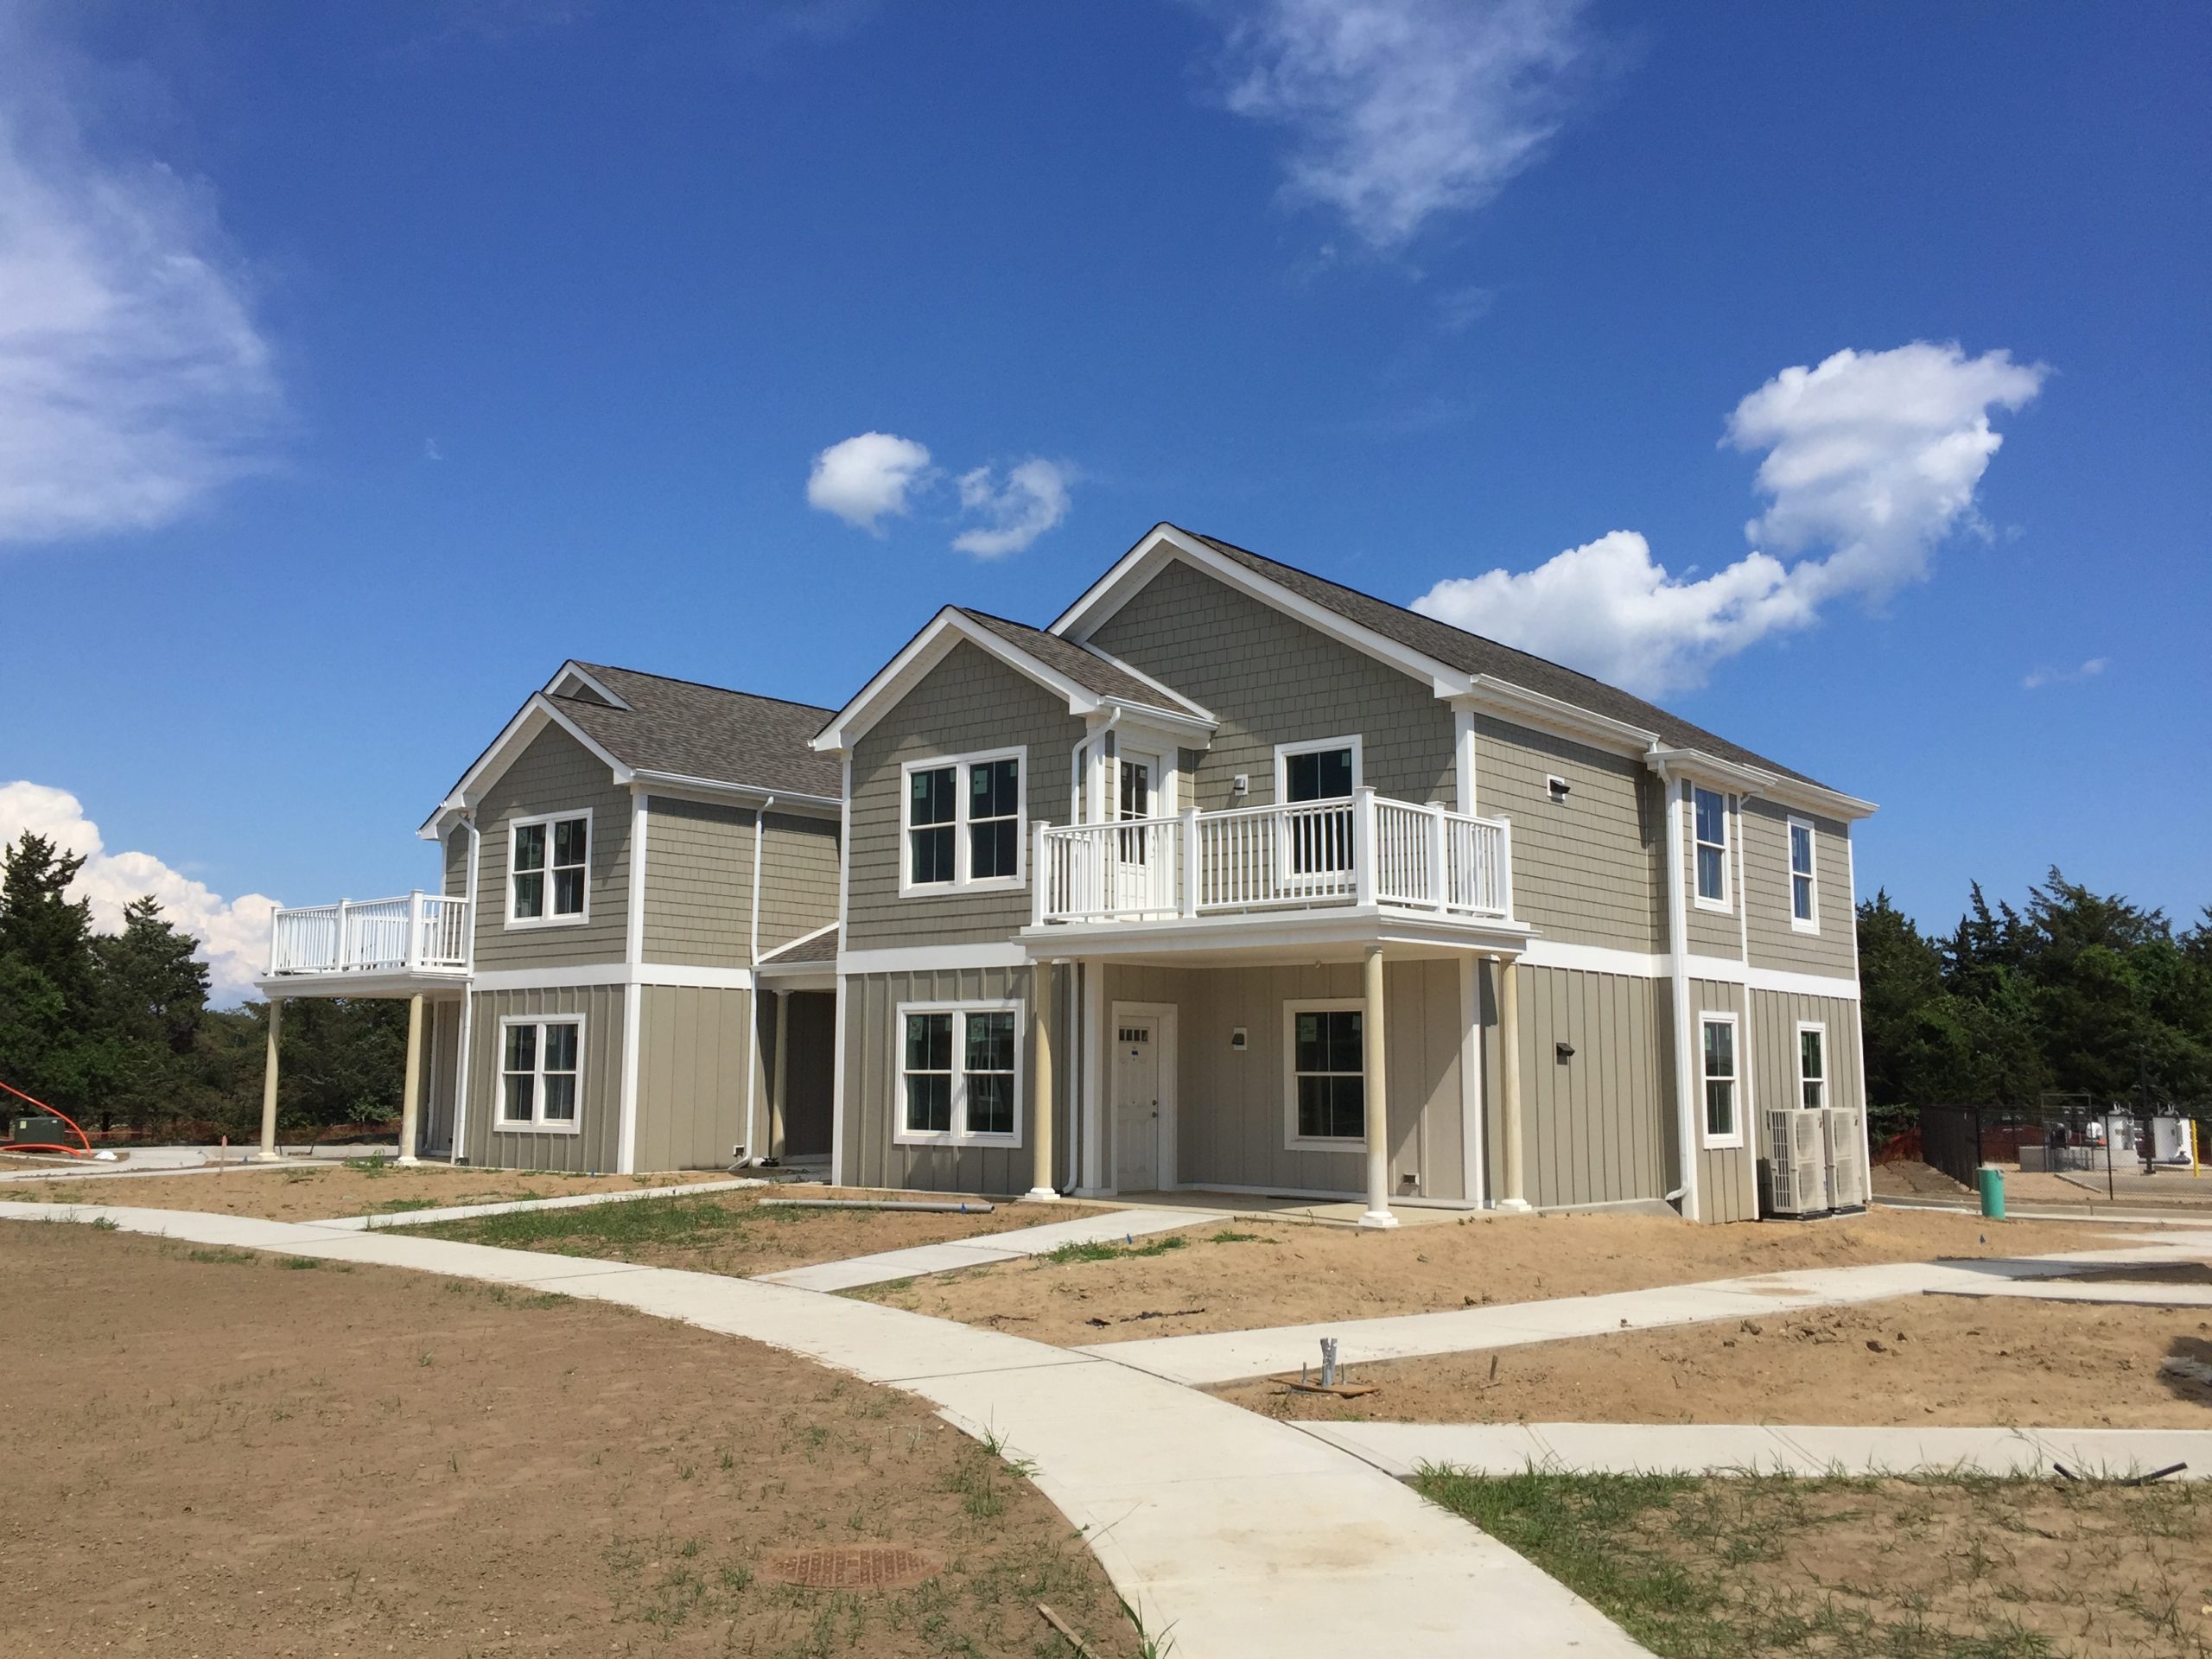 The East Hampton Housing Authority has extended the deadline to apply for the lottery at the Gansett Meadows apartment complex in Amagansett, which is nearing completion. 